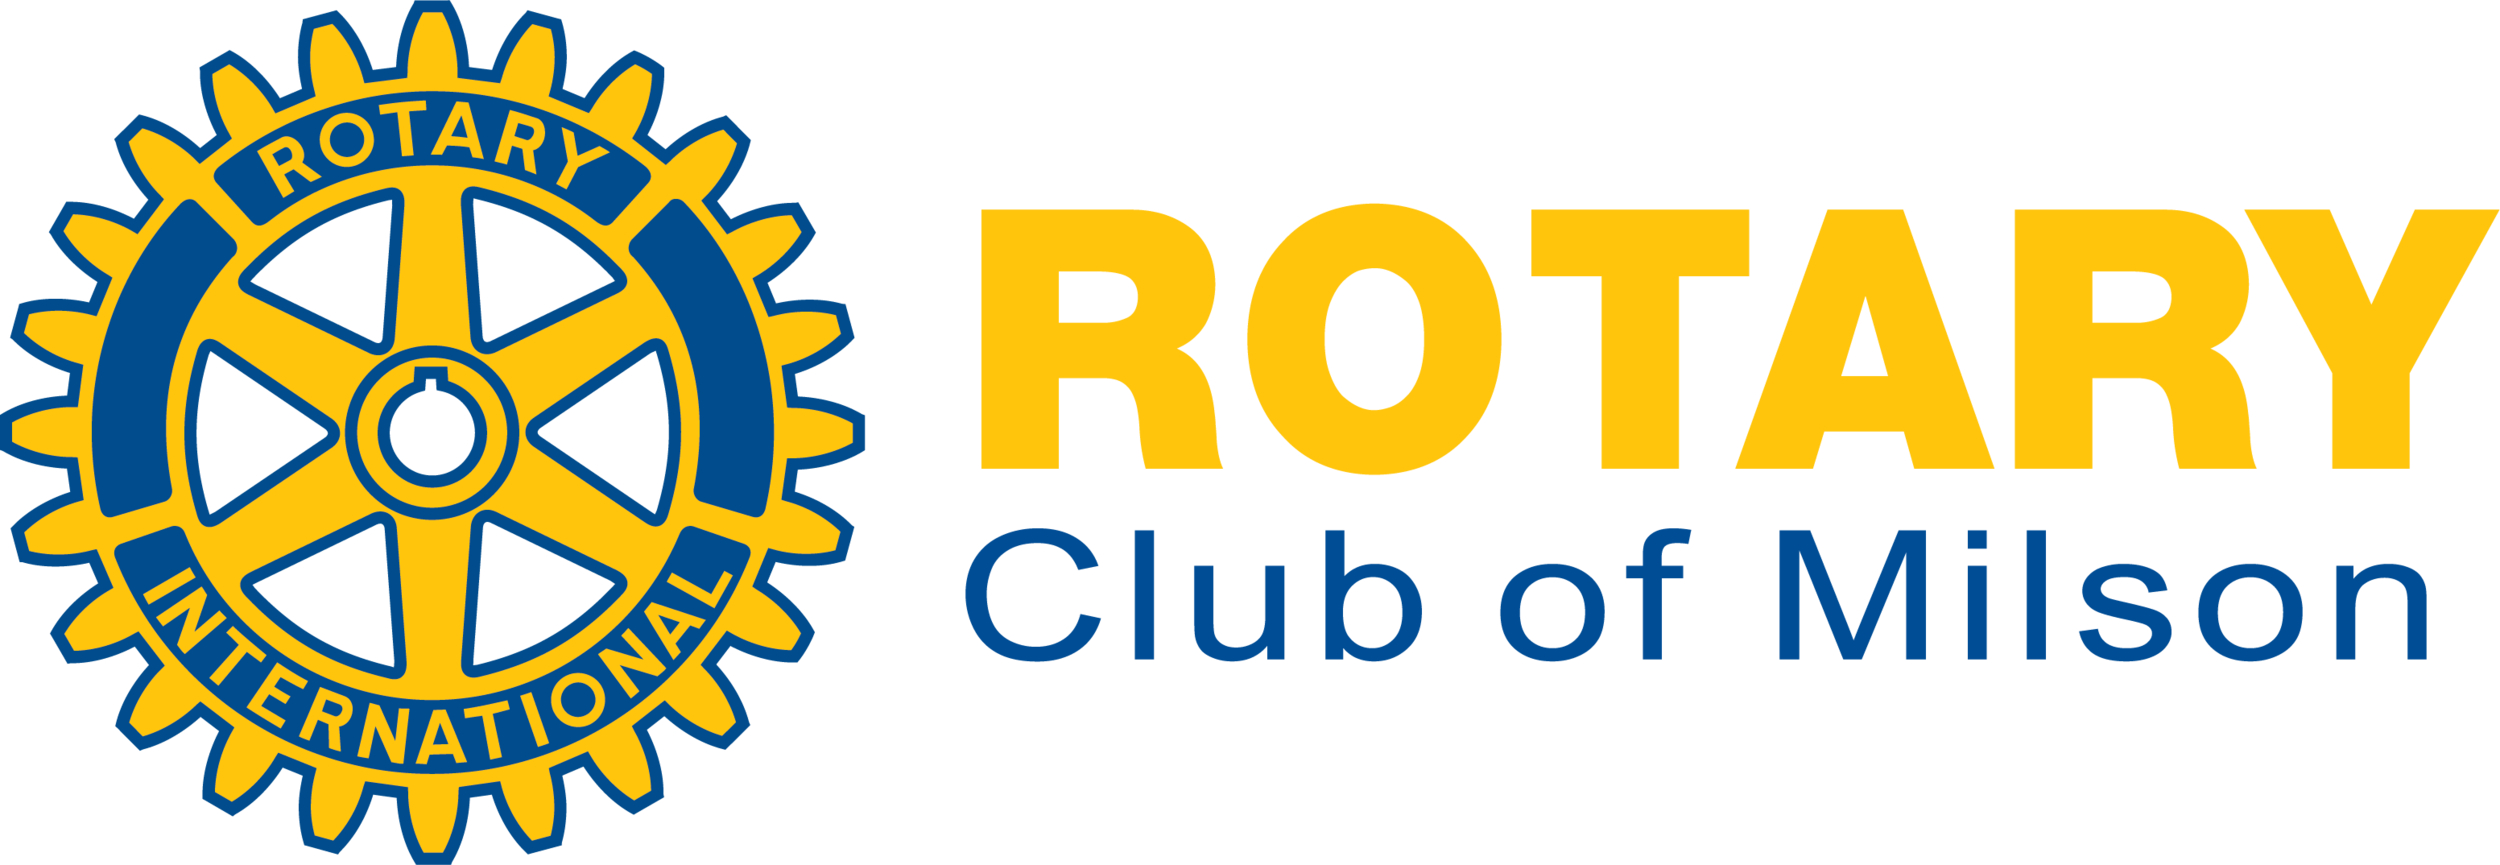 Copy of Rotary Club of Milson